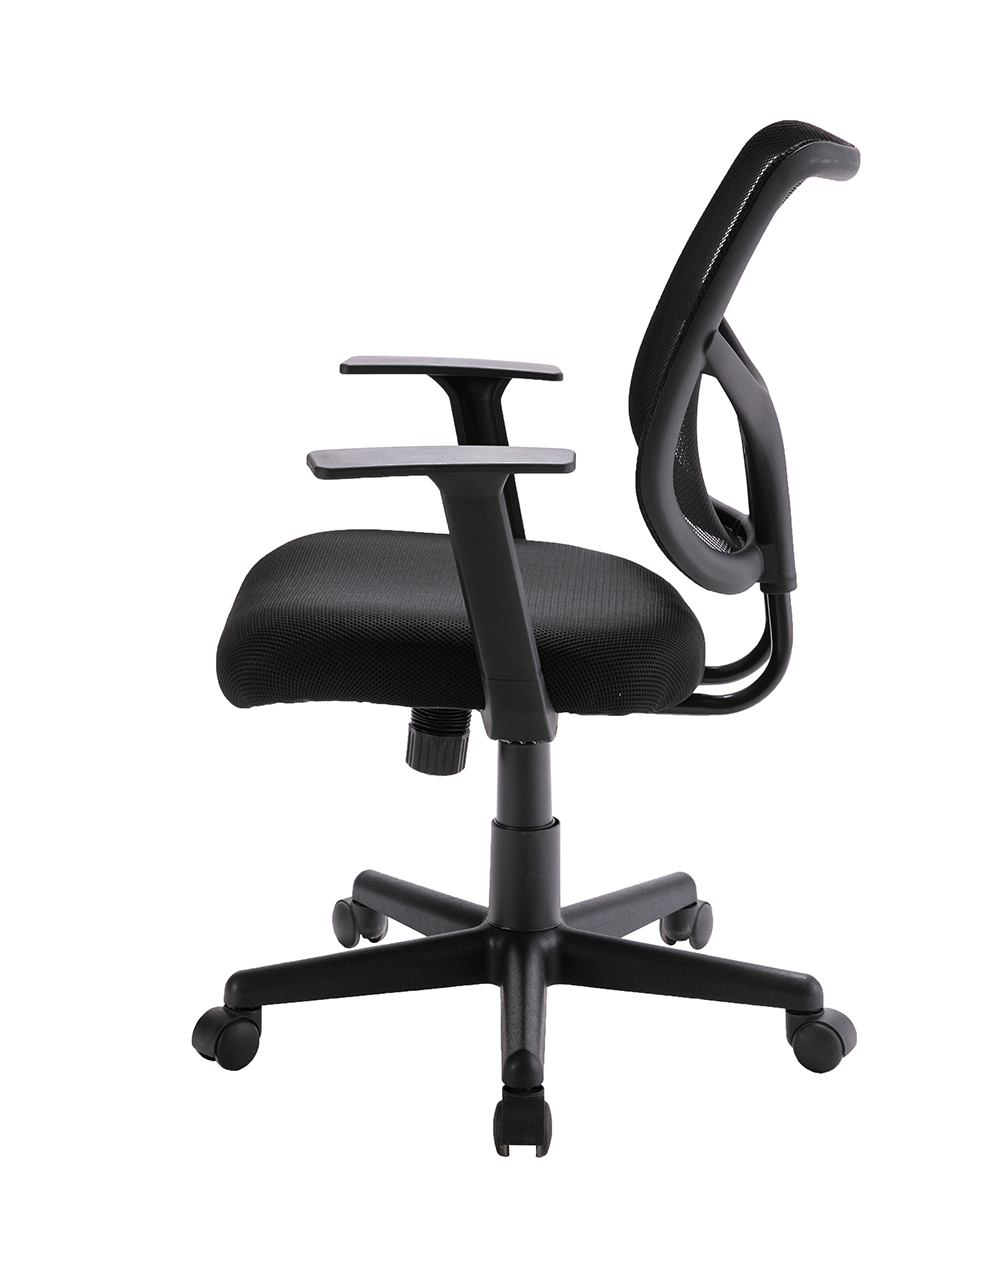 Home Office Nylon Mesh Adjustable Chair with Ergonomic Backrest and Casters - Black